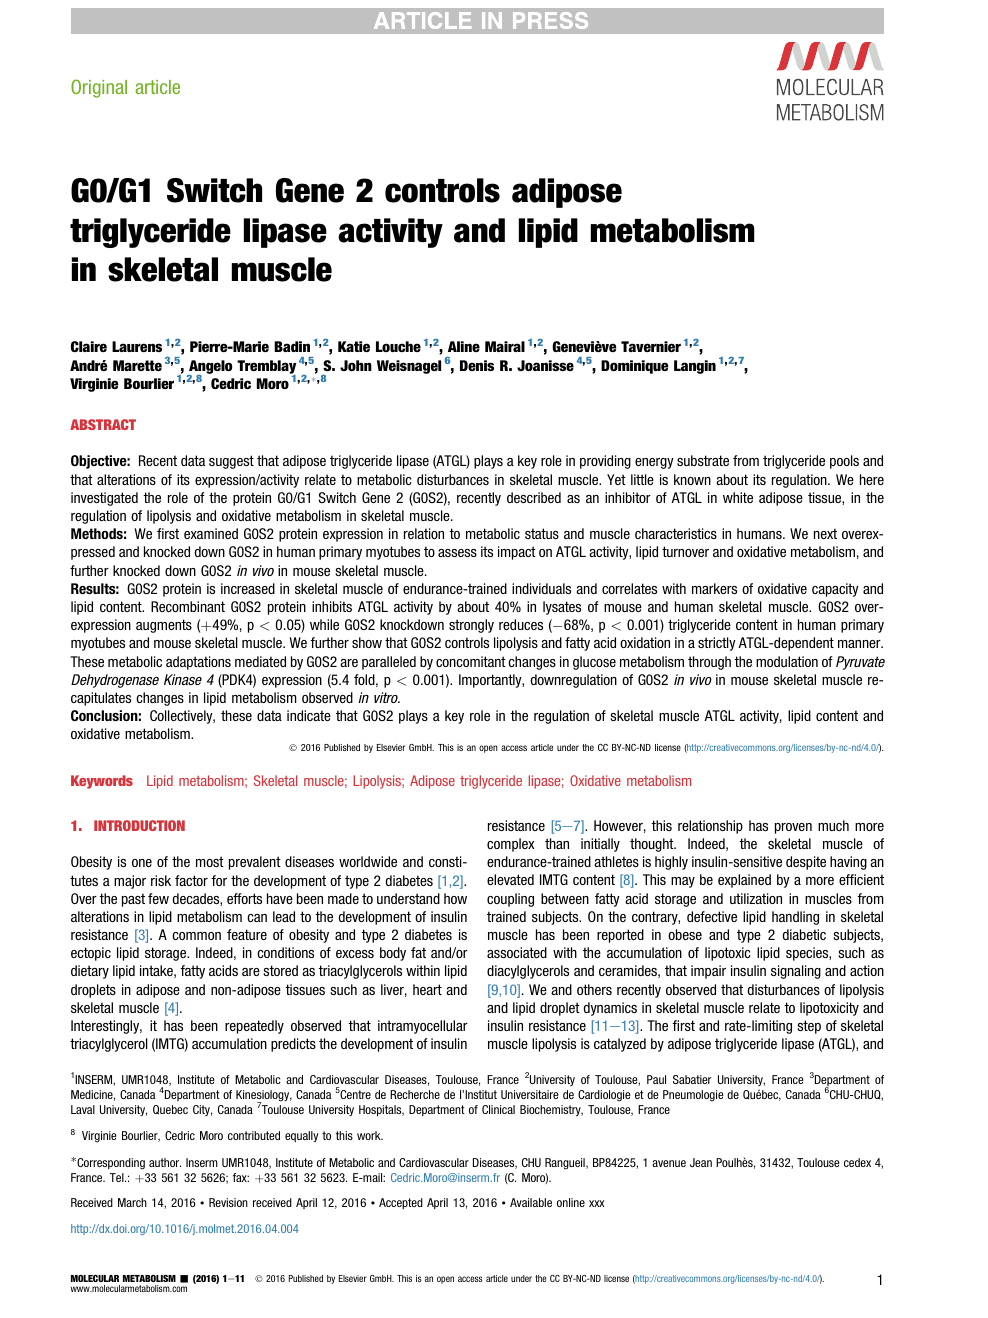 G0 G1 Switch Gene 2 Controls Adipose Triglyceride Lipase Activity And Lipid Metabolism In Skeletal Muscle Topic Of Research Paper In Biological Sciences Download Scholarly Article Pdf And Read For Free On